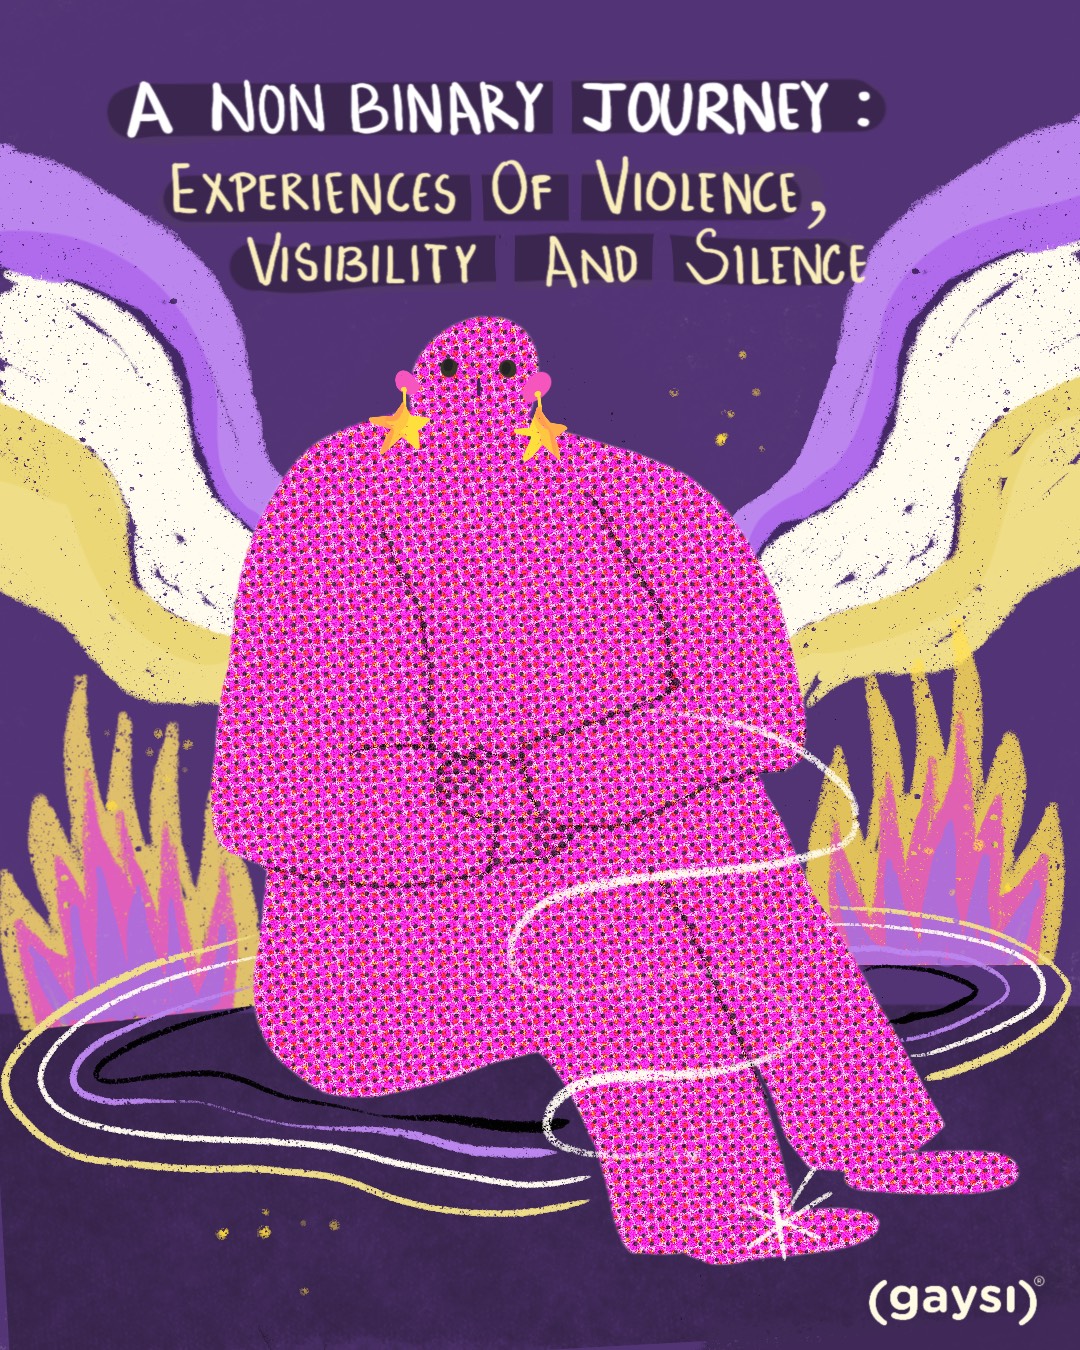 A Non-Binary Journey: Experiences Of Visibility, Violence, And Silence.